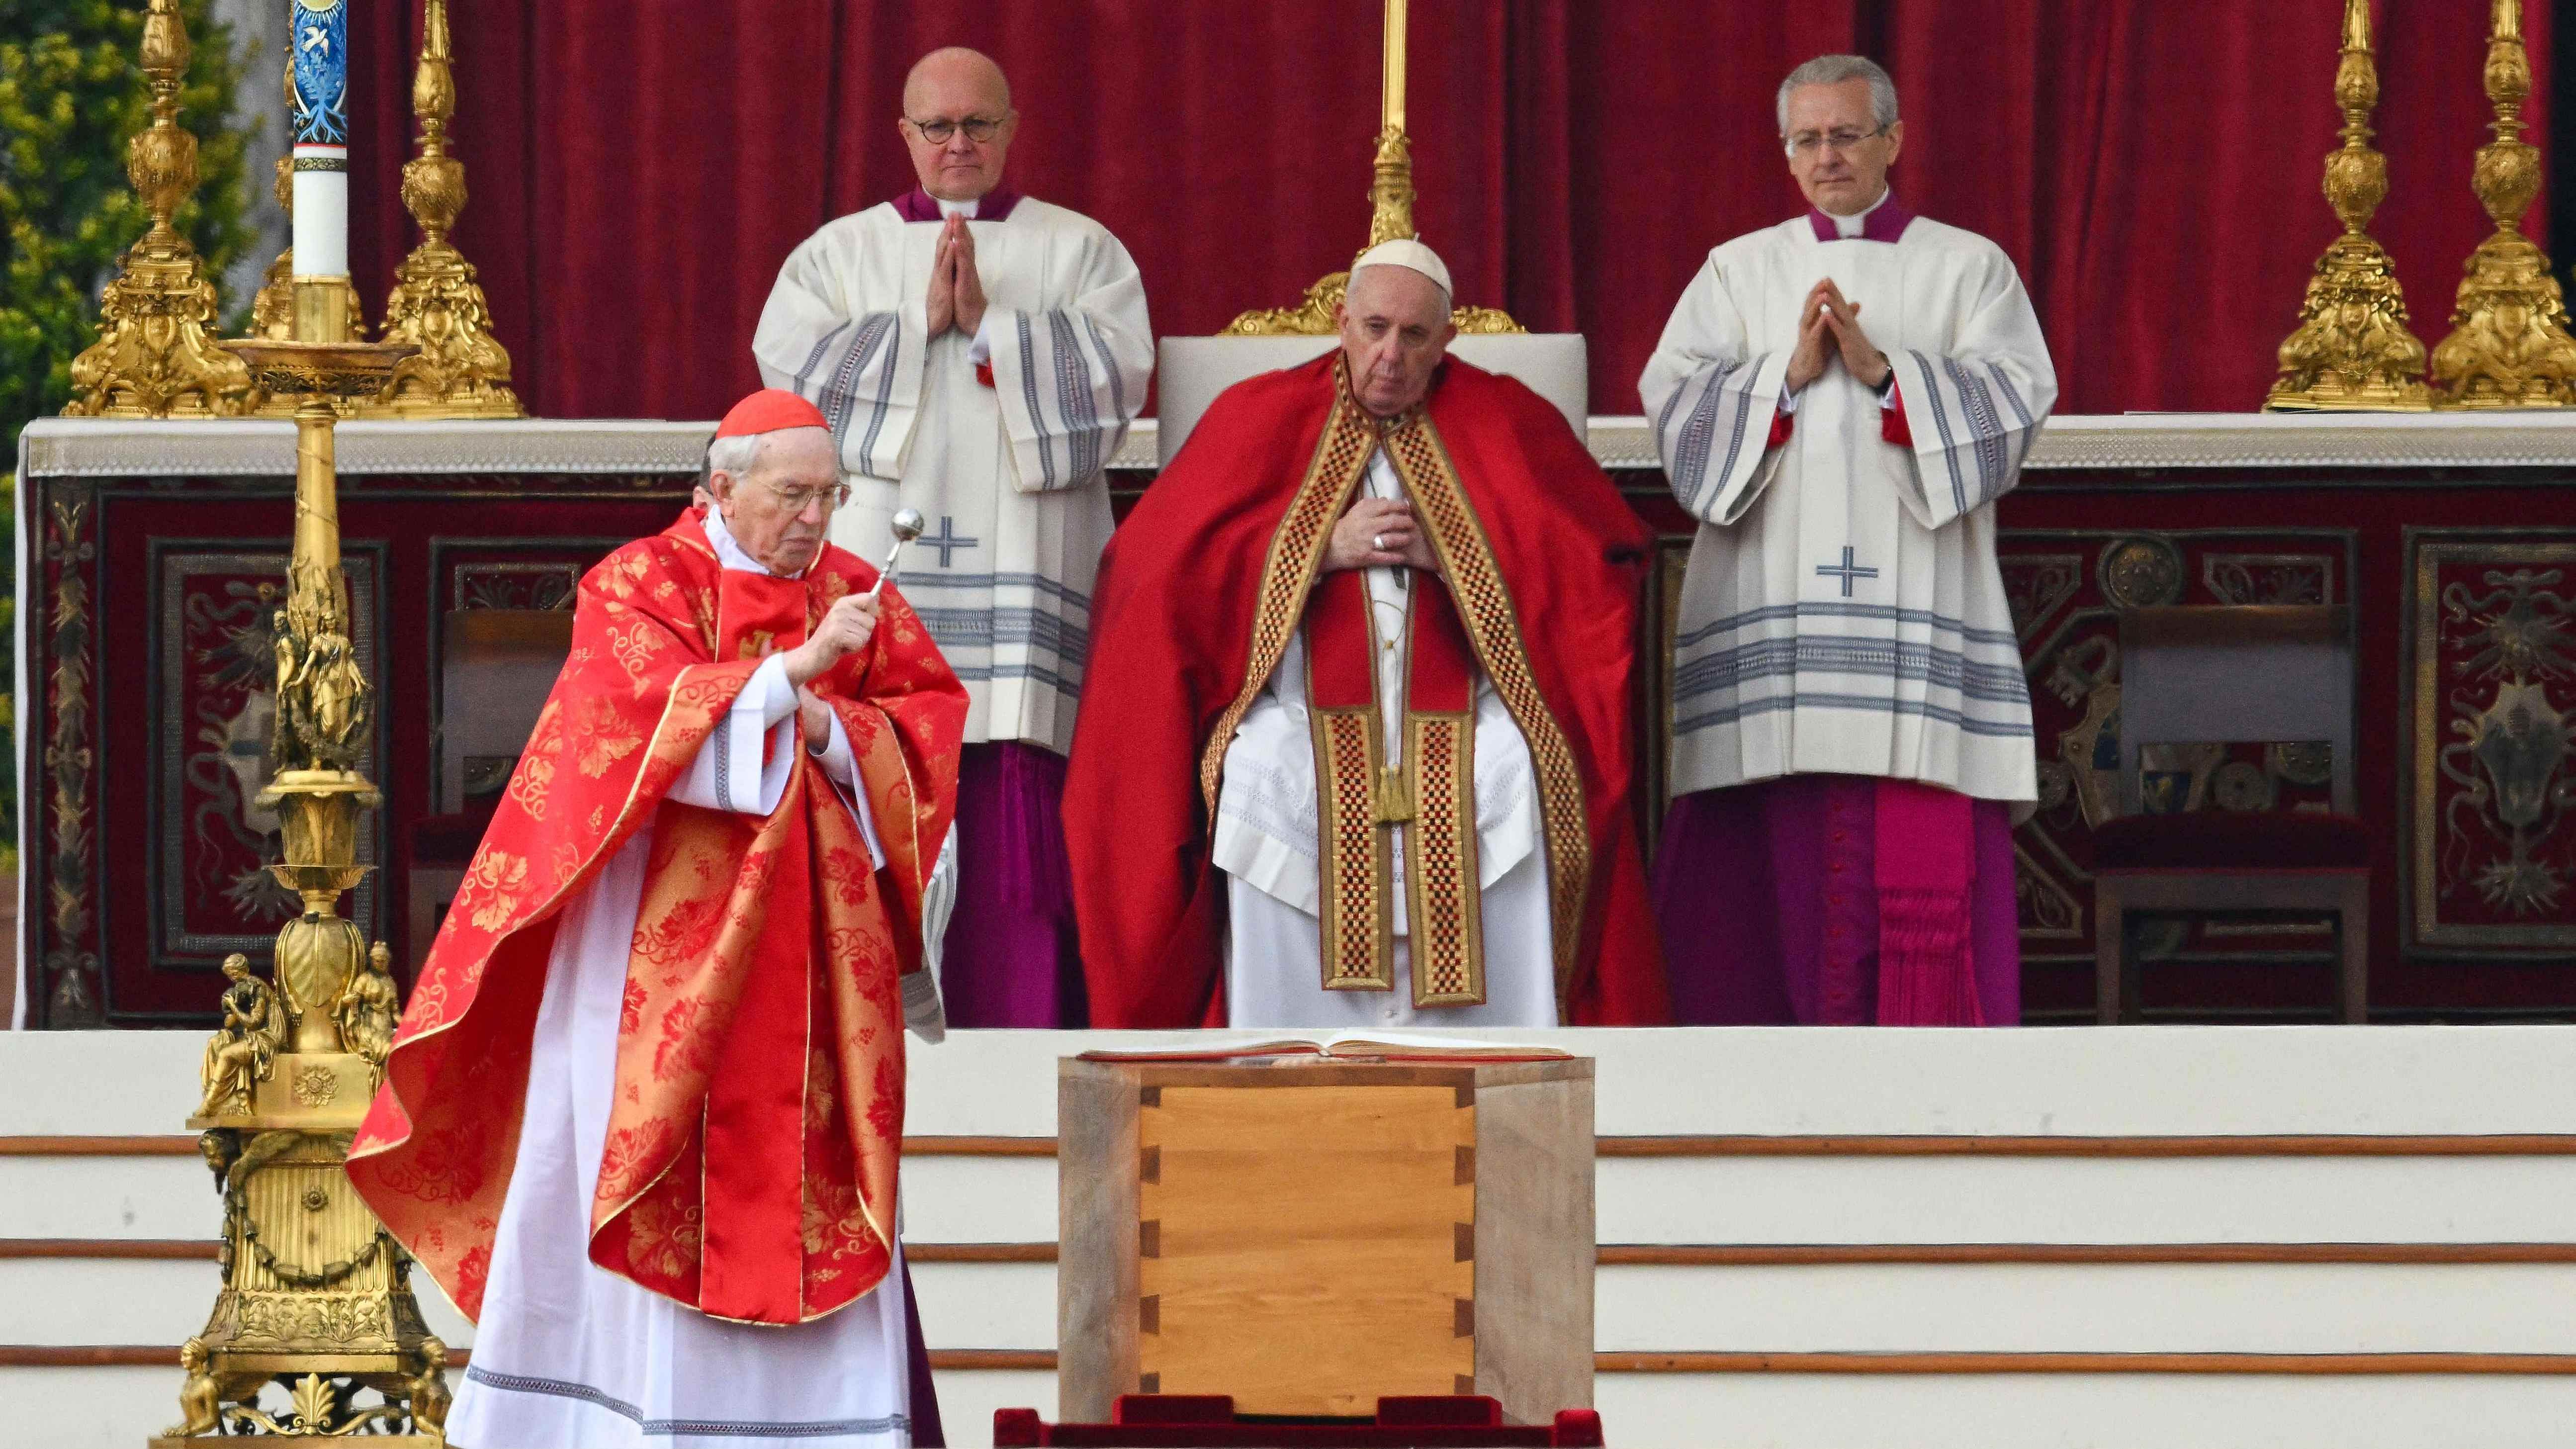 Italian Cardinal Giovanni Battista Re (L) blesses the coffin of Pope Emeritus Benedict XVI, as Pope Francis looks on (C) during his funeral mass at St. Peter's square in the Vatican. Credit: AFP Photo